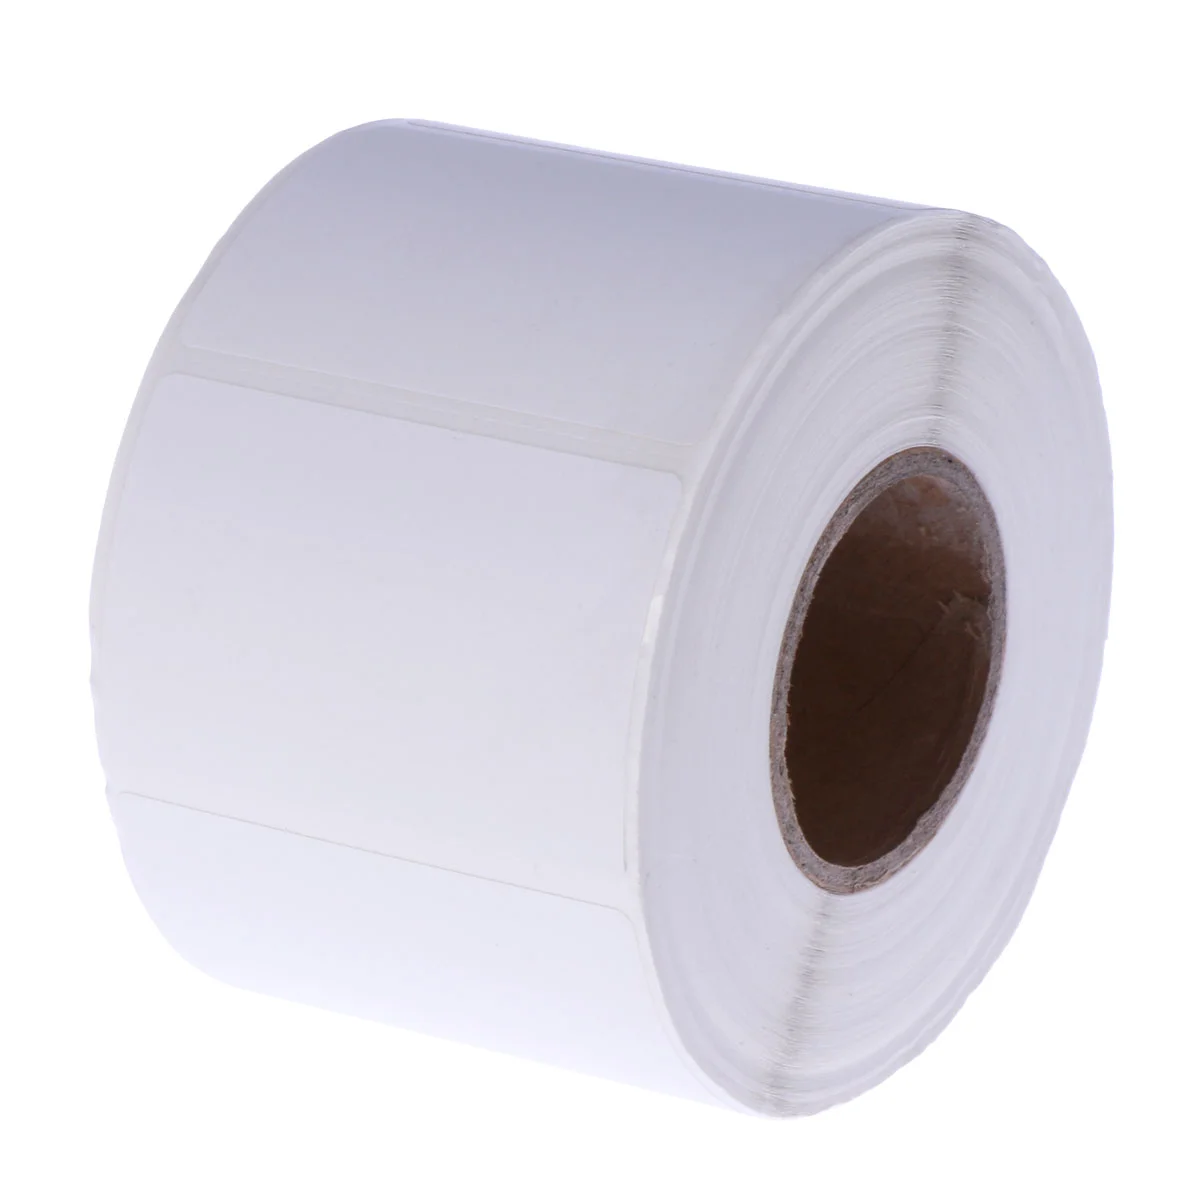 

Colorful Labels Thermal Transfer Labels Printer Paper Self-Adhesive Blank Thermal Printer for Office Kitchen Milk Tea Shop